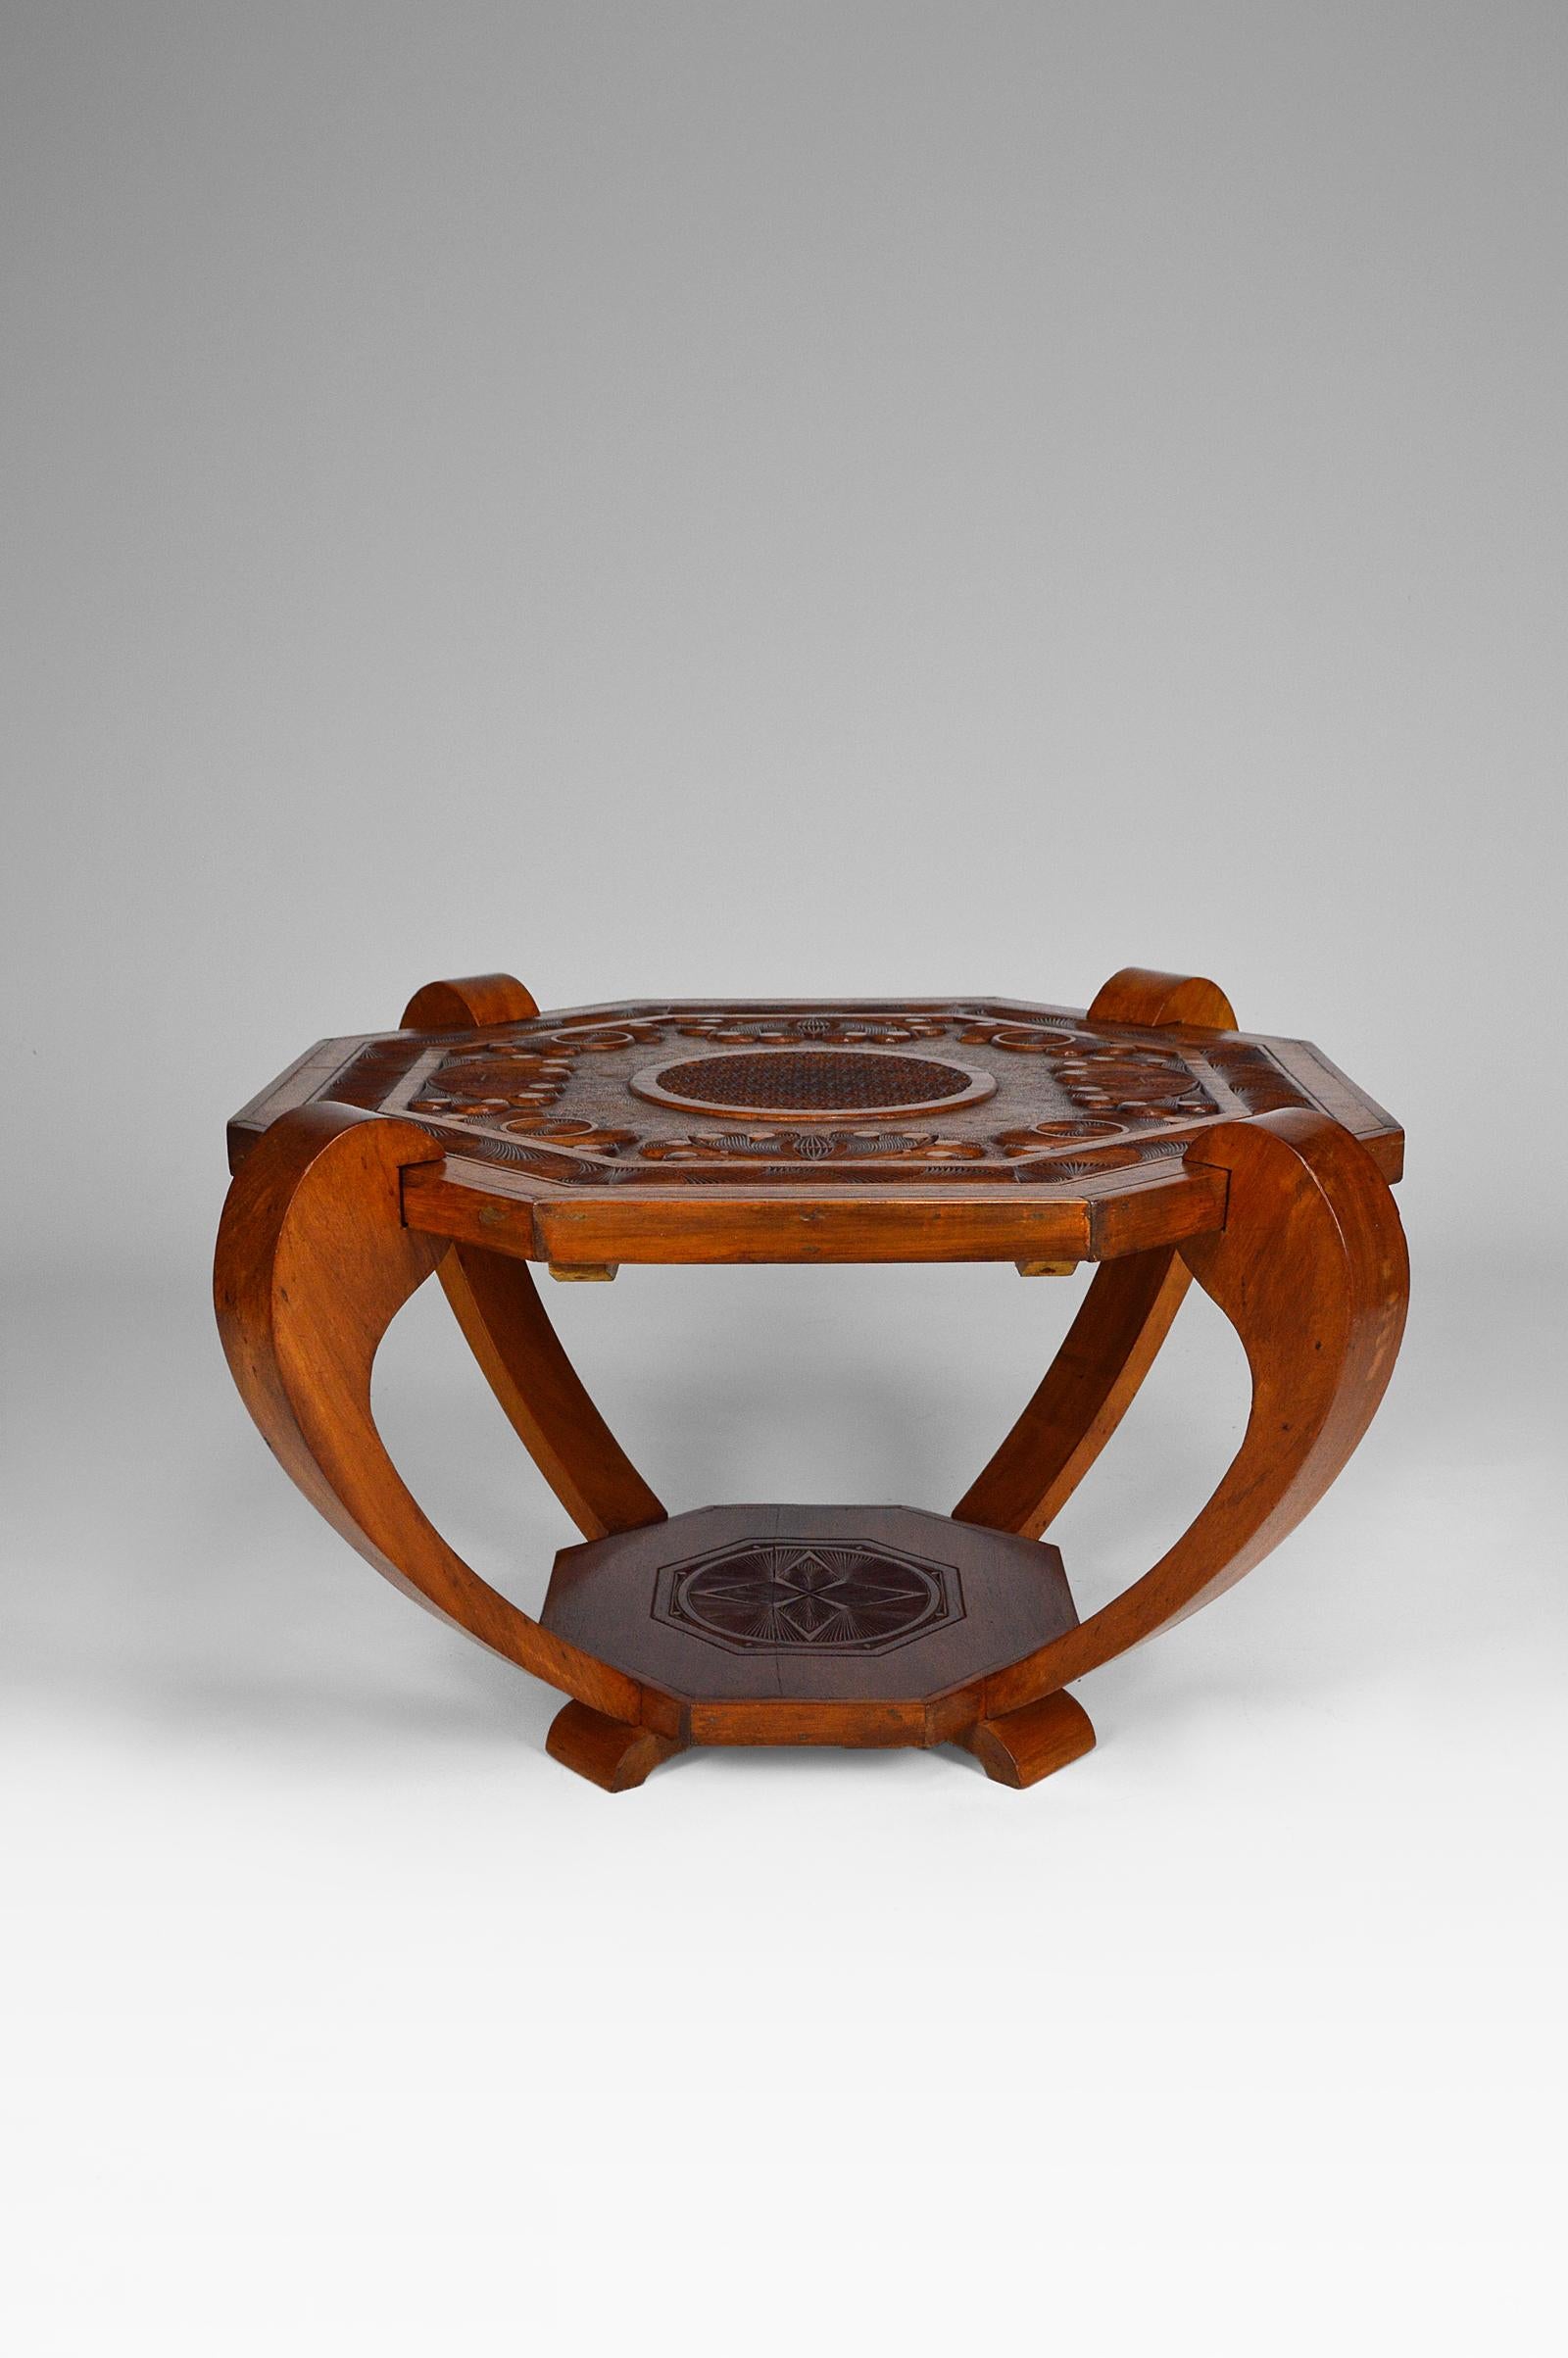 Very beautiful tea table / pedestal table with two carved exotic wood trays.

The sculptures on the plateau represent a stylized sun surrounded by vegetation.

Colonial Art Deco / Mid Century style, circa 1930-1940.
Country of origin